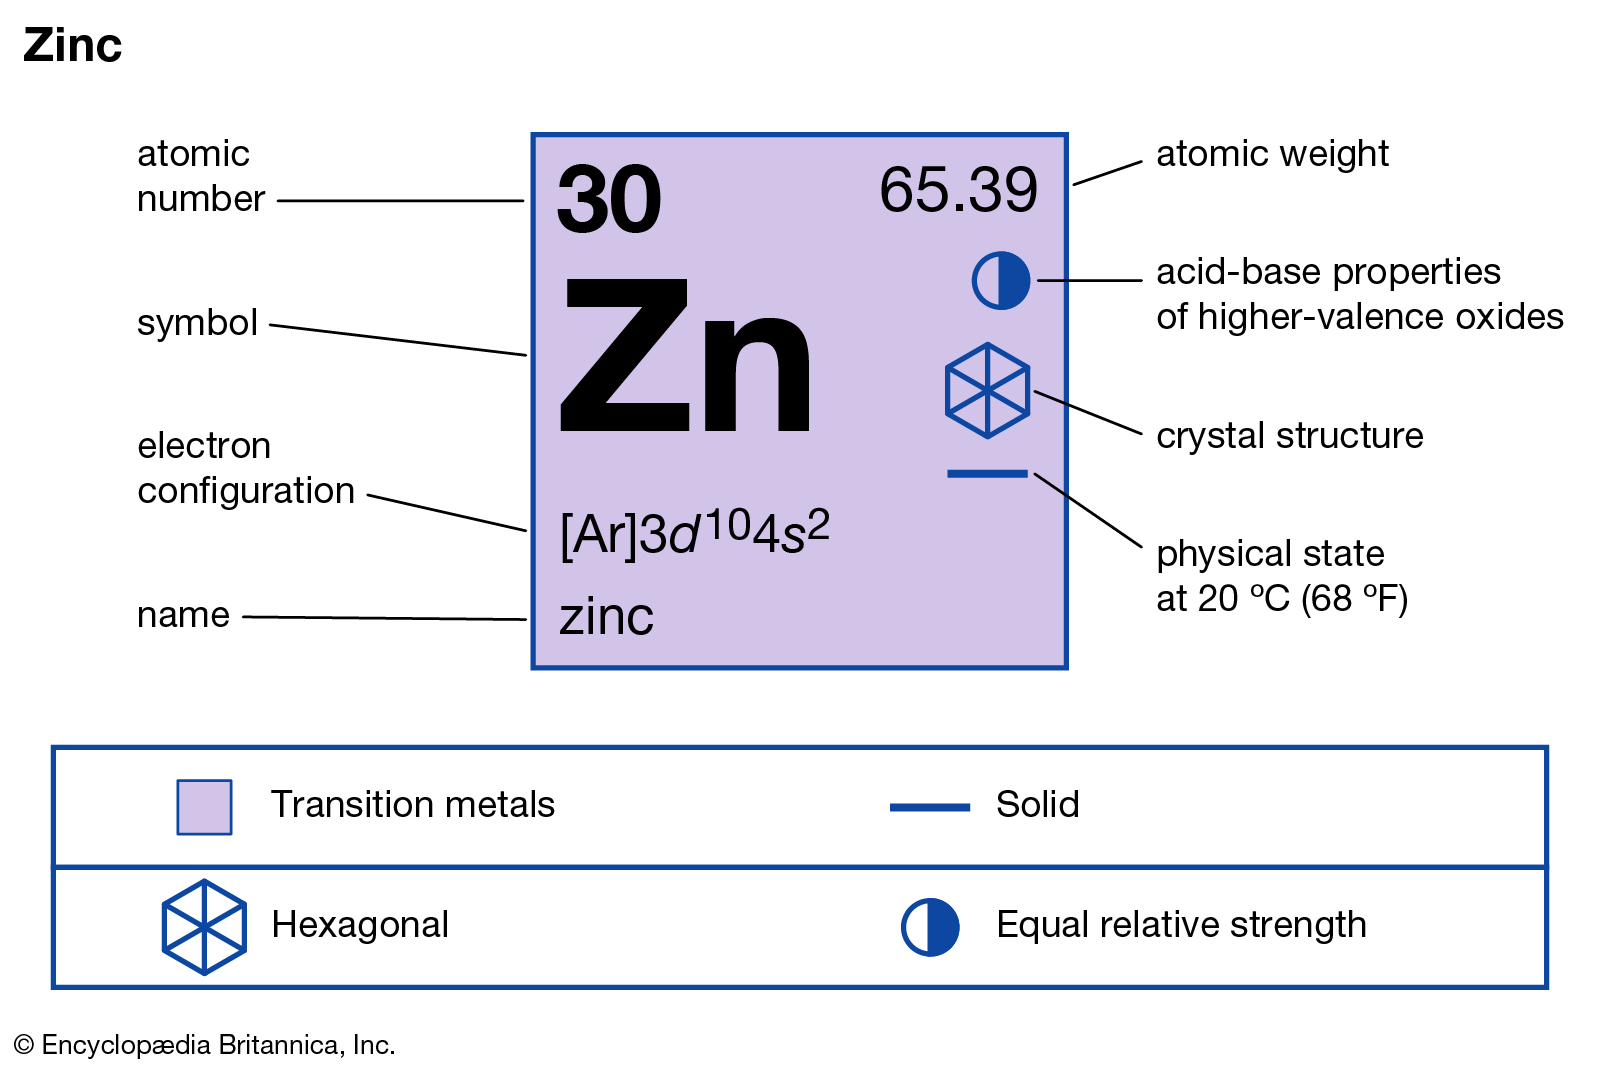 hinh-anh-interesting-facts-about-zinc-62-0